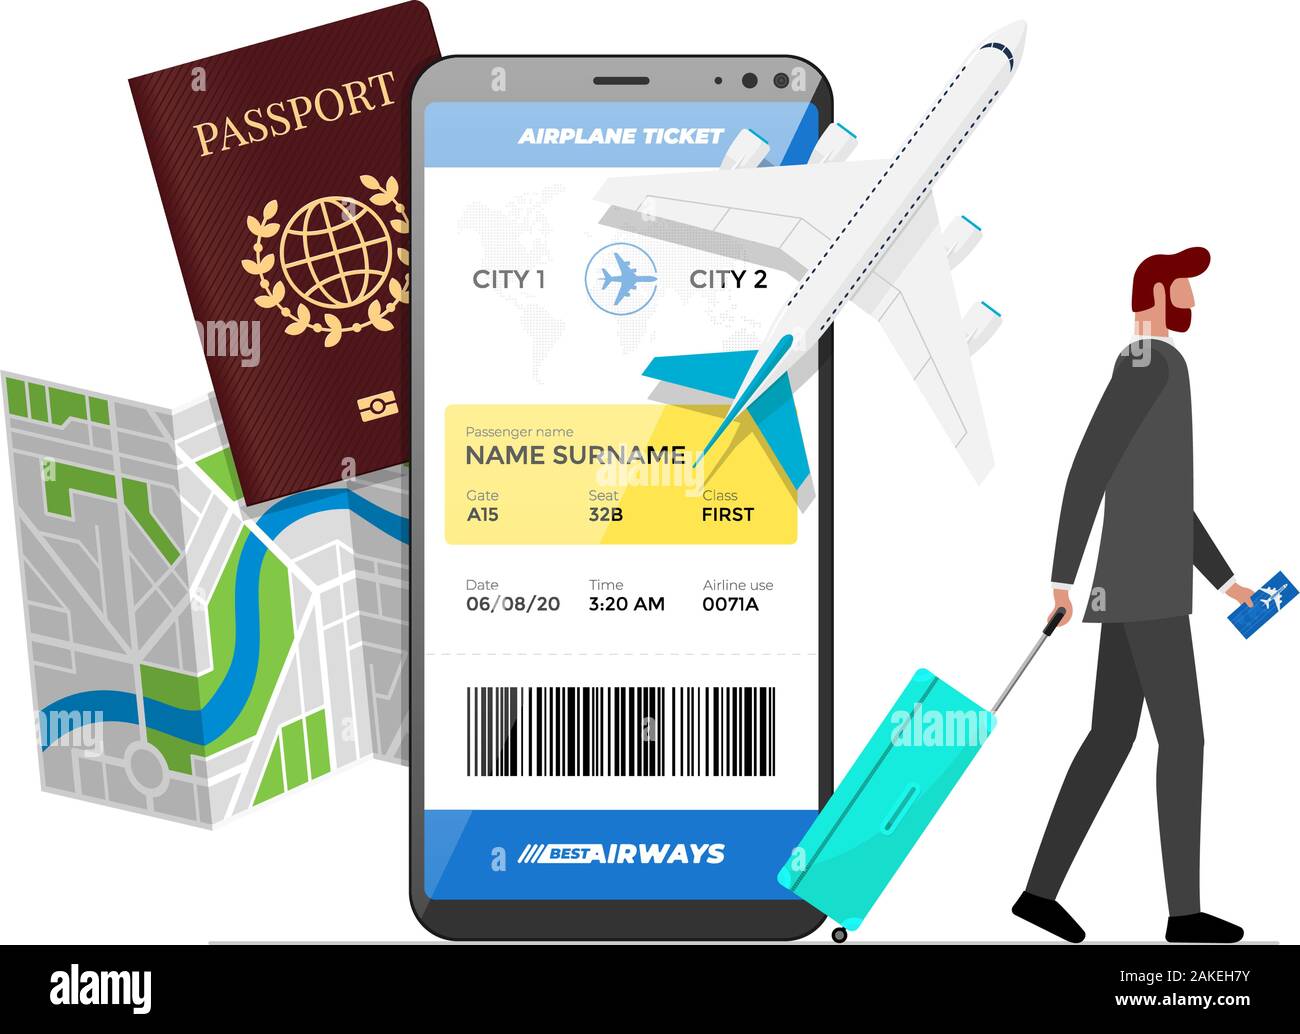 Online flight booking service concept. Business man with luggage book airplane travel on smartphone. Plane ticket reservation website or mobile app. Trip planning map and passport vector illustration Stock Vector